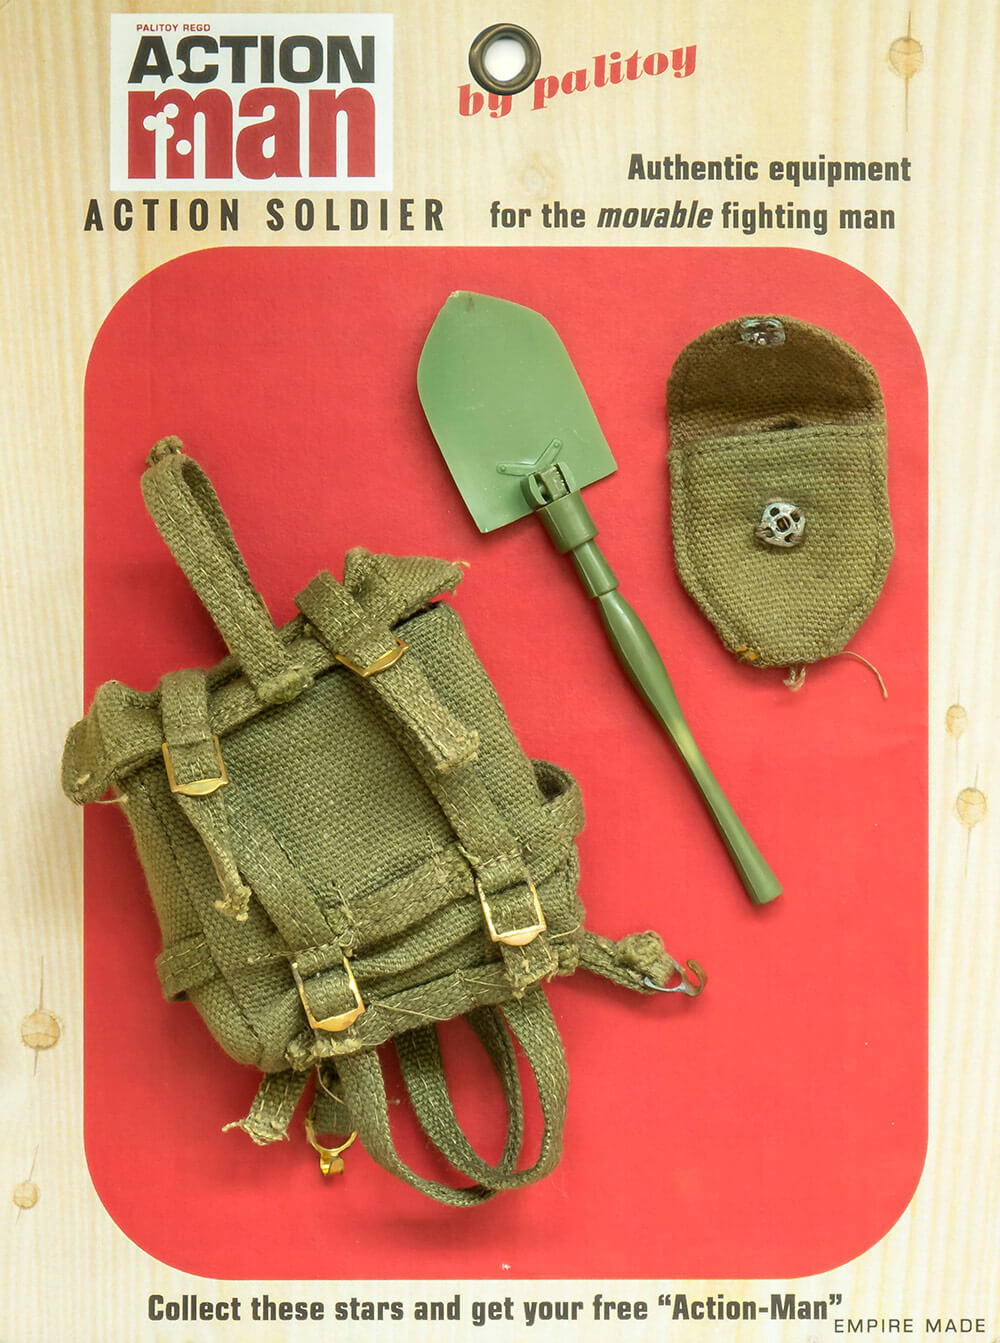 Action Man Palitoy Rare Combat Soldier's First Aid Pouch VGC c1966-69 